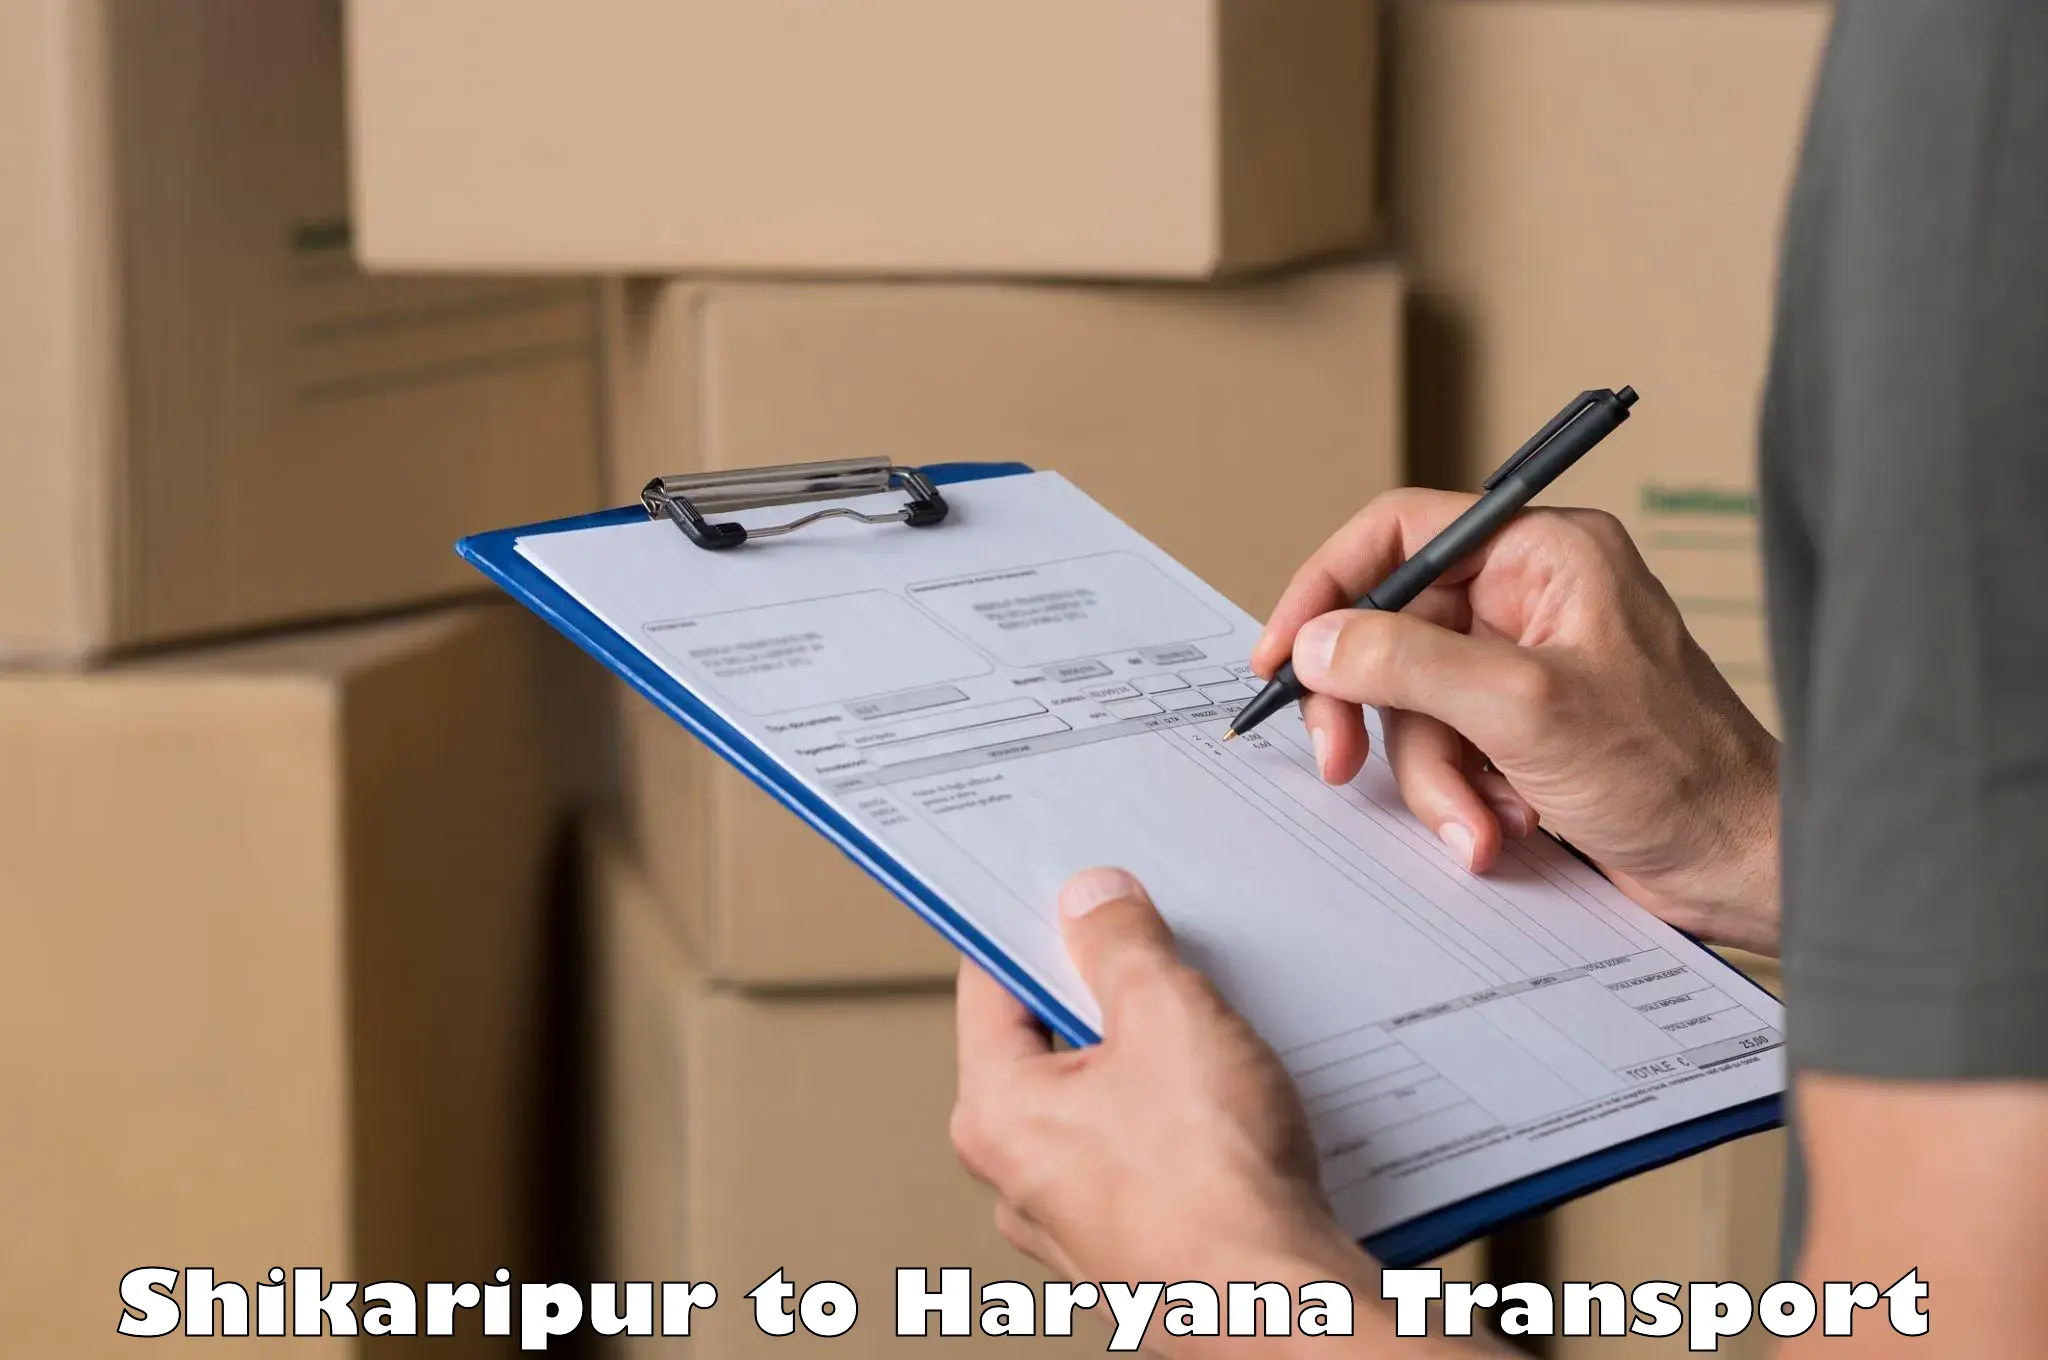 Container transport service Shikaripur to Kalanwali